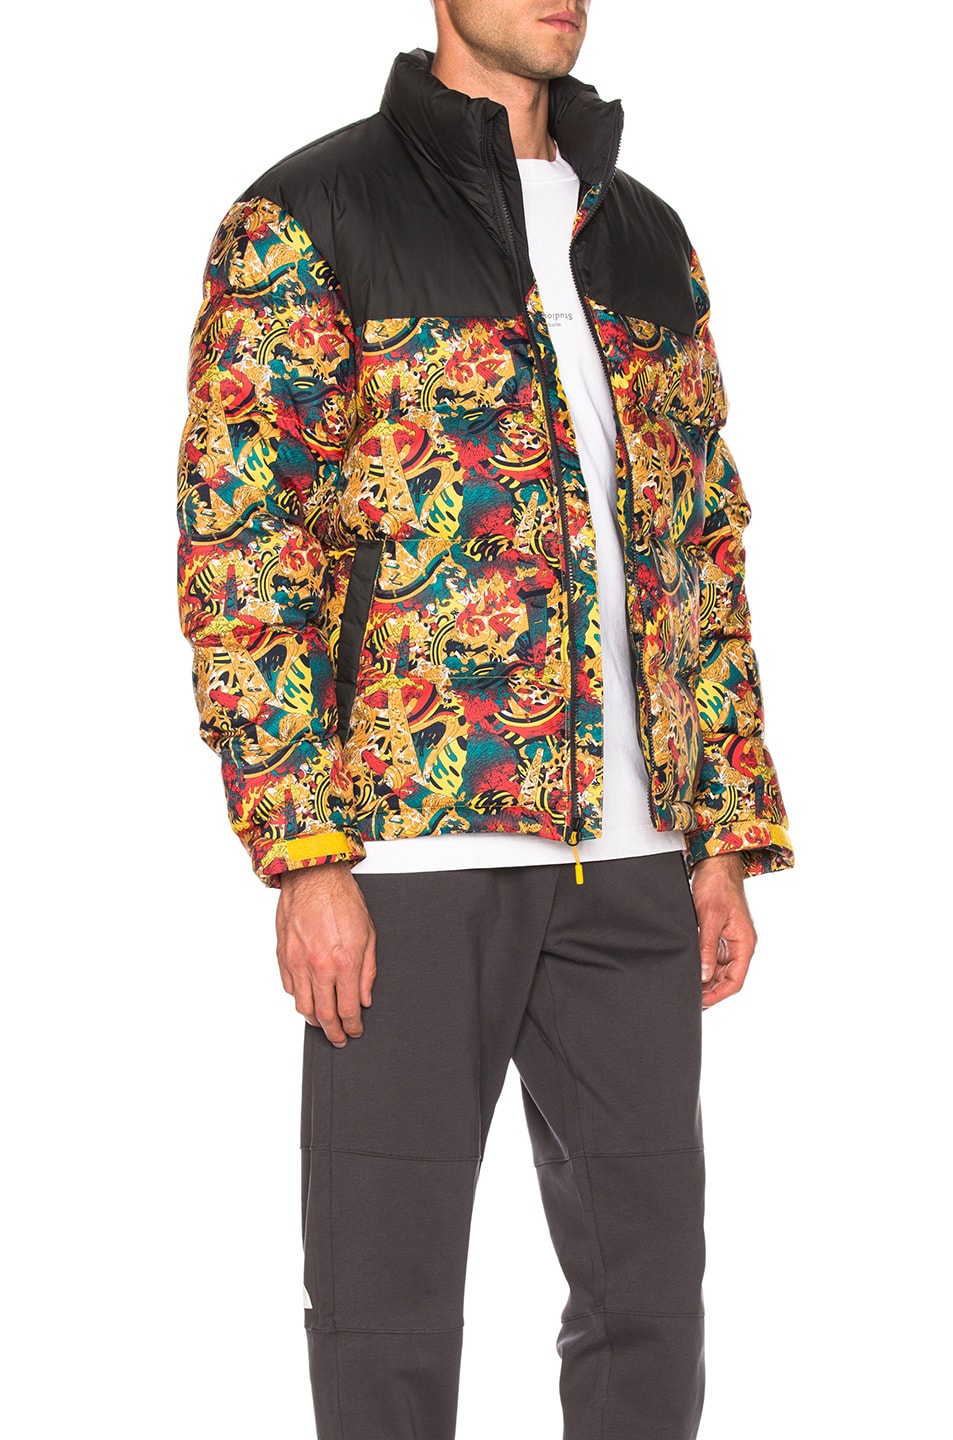 the north face leopard yellow genesis print